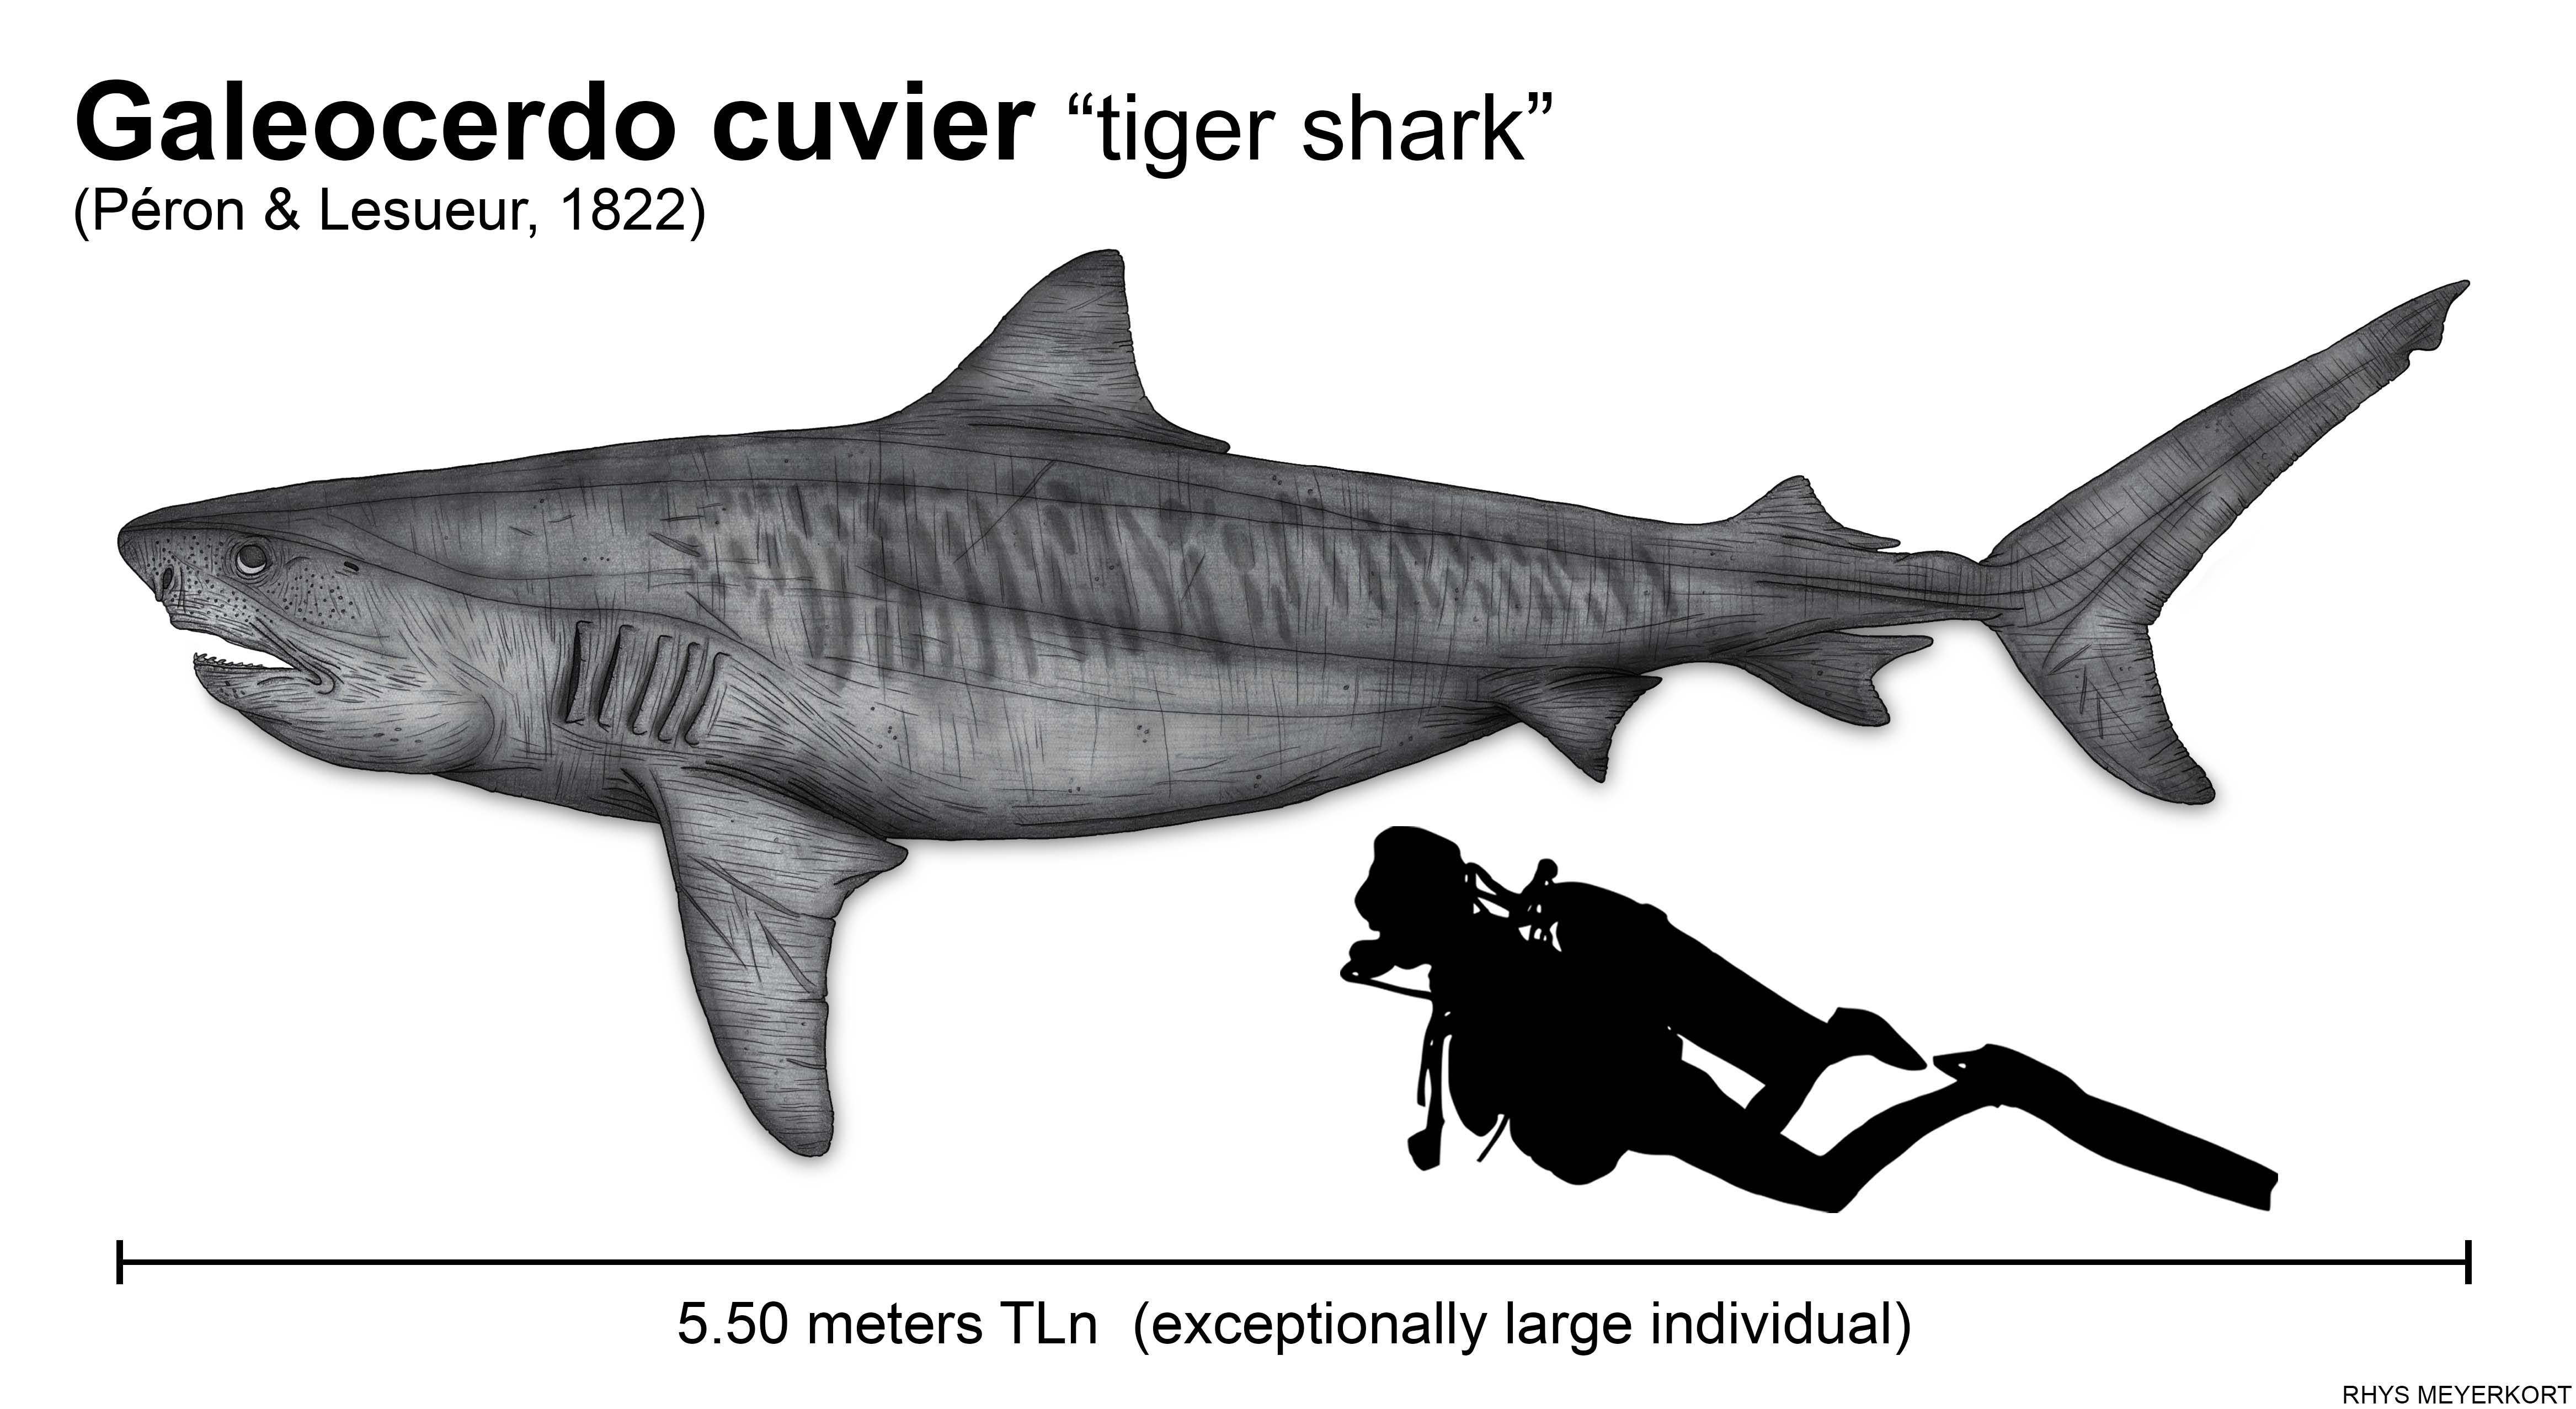 The size of the tiger shark (Galeocerdo cuvier) by Paleonerd01 on DeviantArt